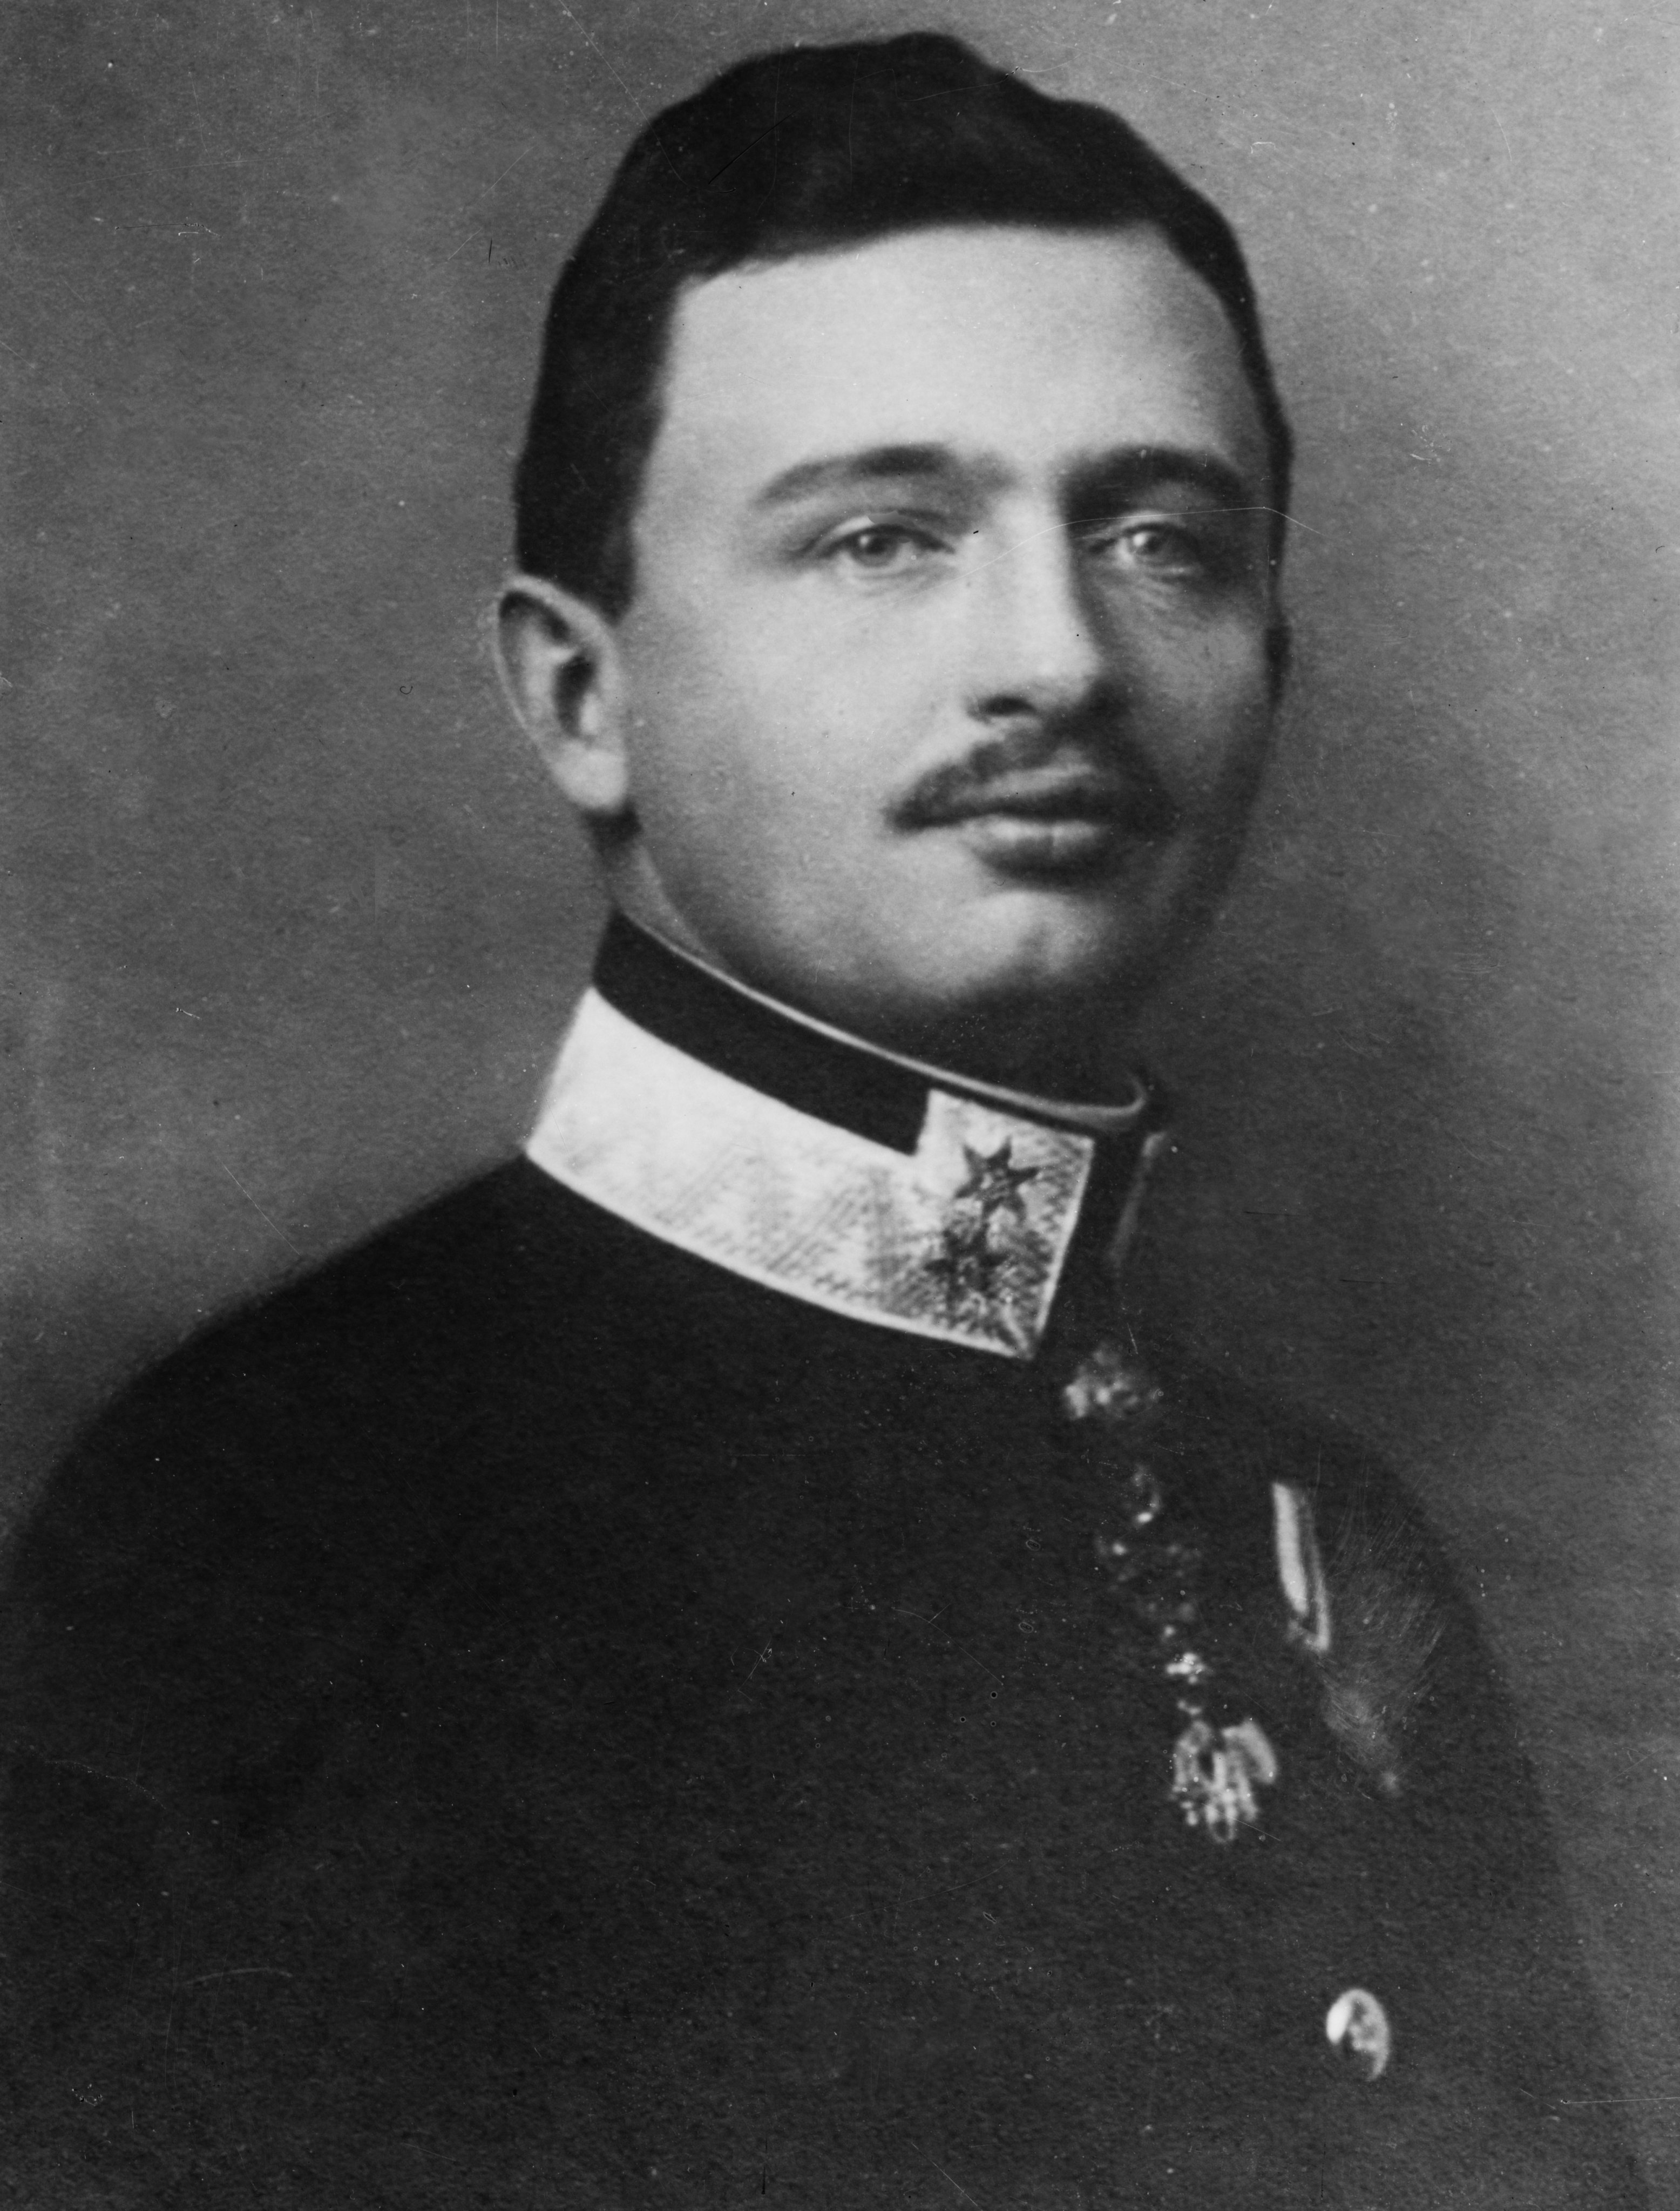 Charles I of Austria (Charles IV of Hungary) (1887-1922) the last ruler of the Austro-Hungarian Empire ca. 1914